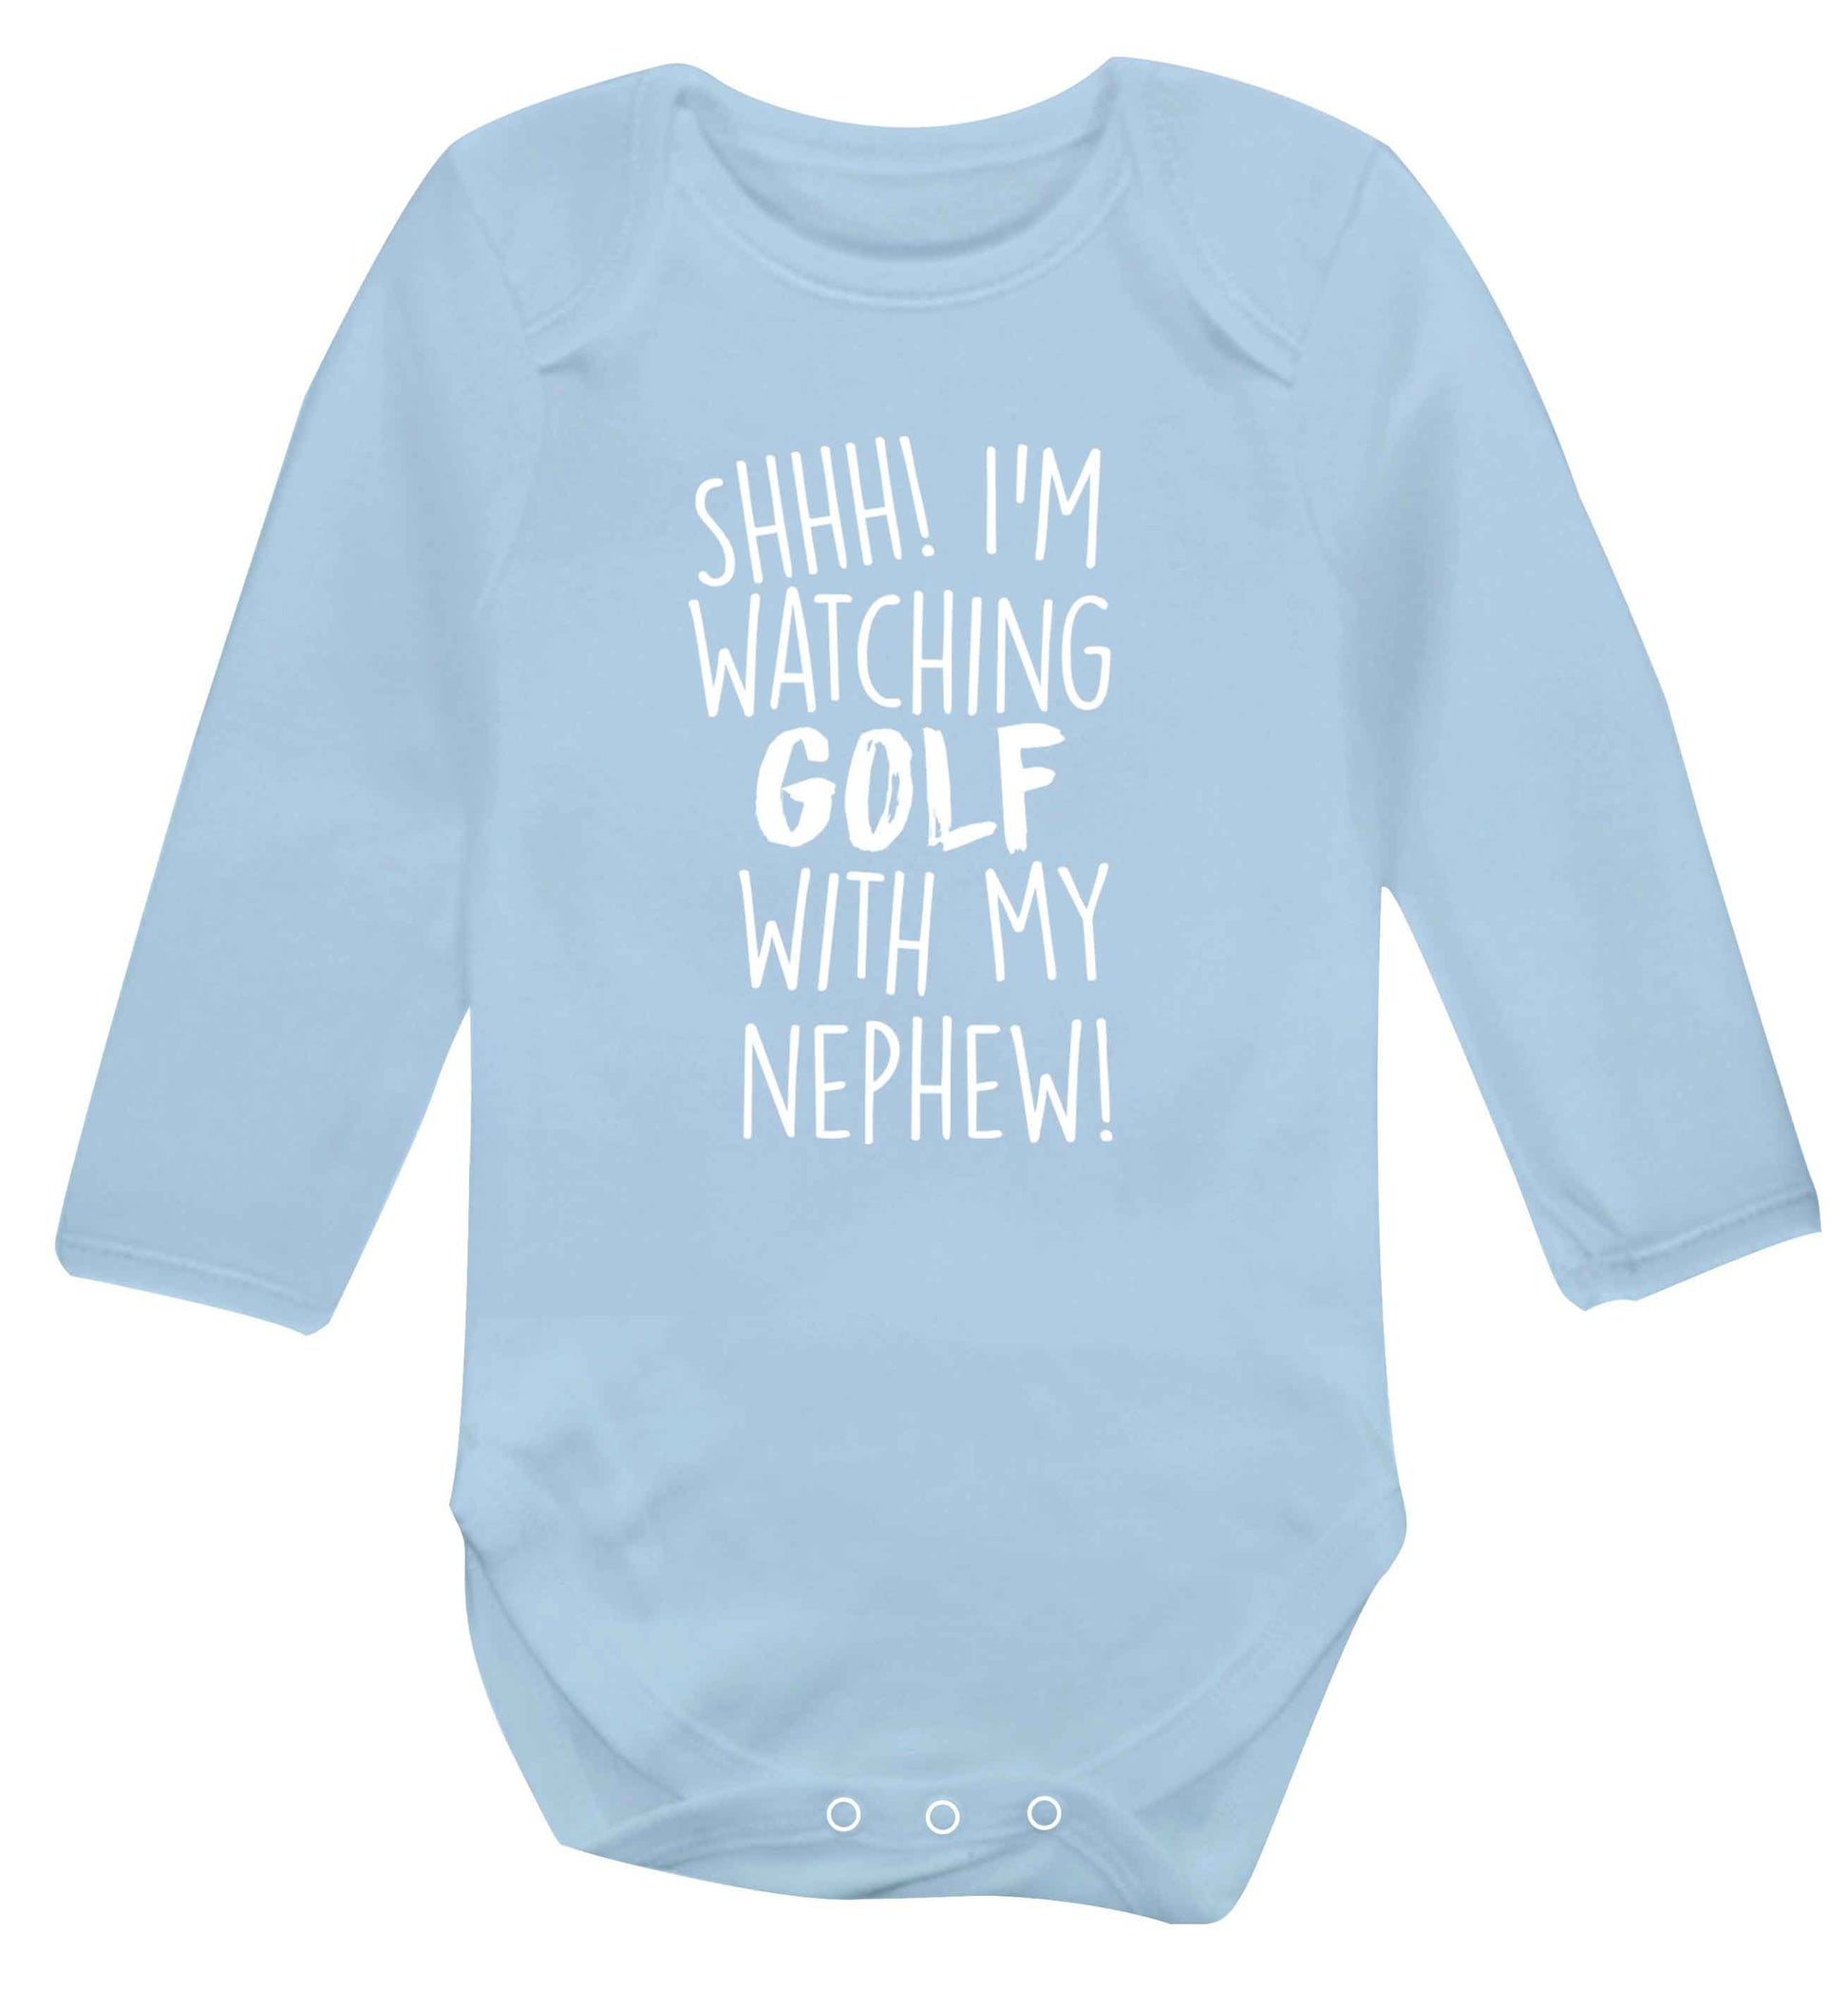 Shh I'm watching golf with my nephew Baby Vest long sleeved pale blue 6-12 months